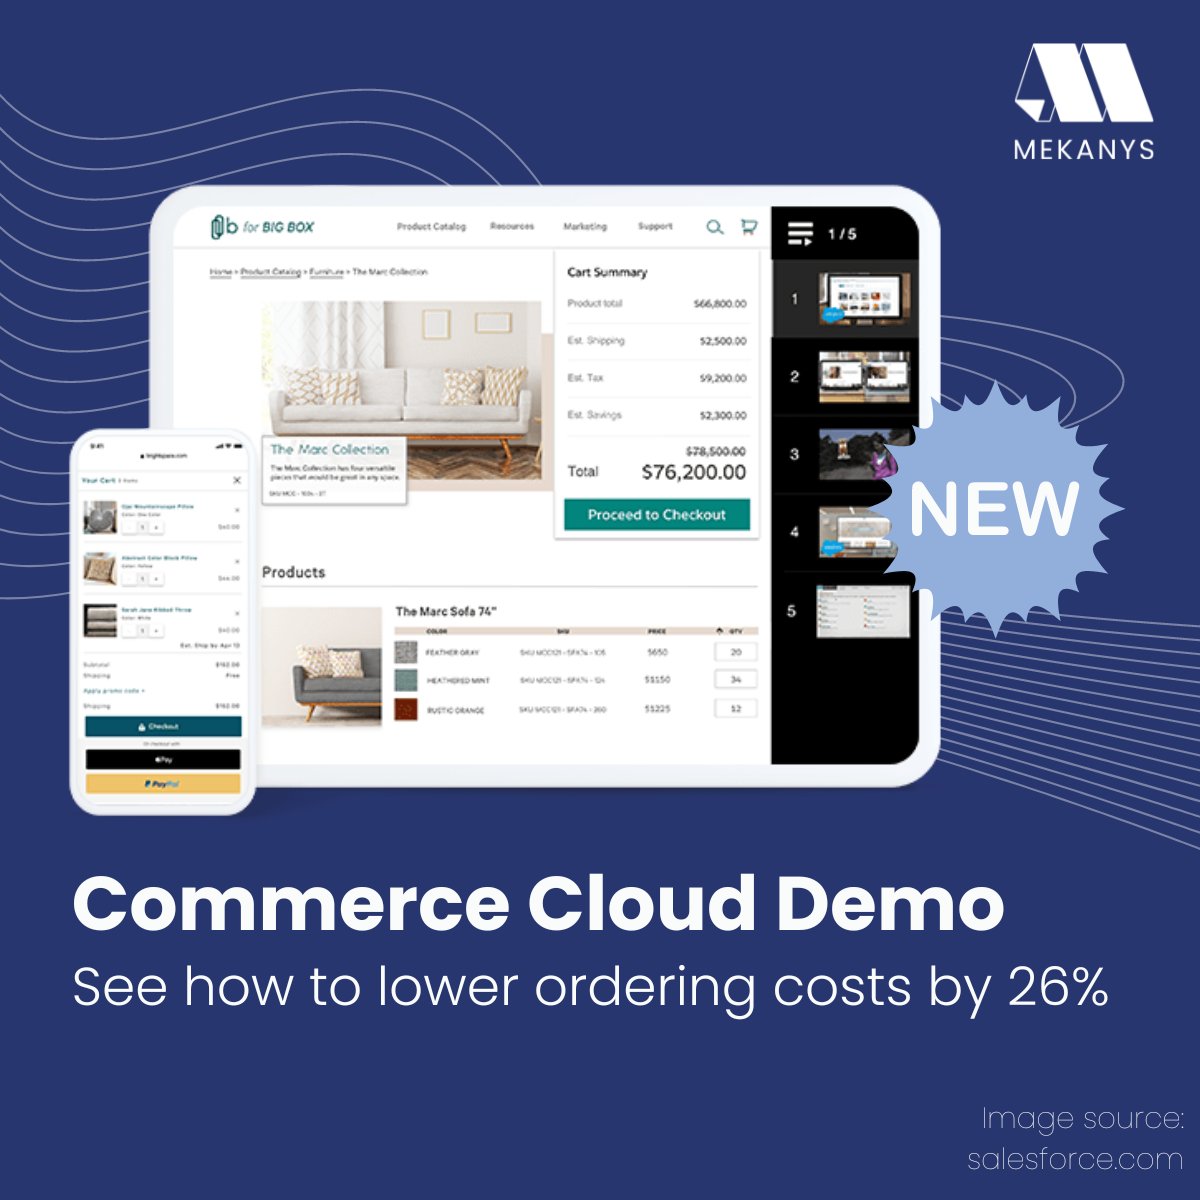 Unlock our full demo playlist! Lower costs by 26% and achieve commerce success with #CommerceCloud!

Ready to transform your commerce? Learn more: buff.ly/49hXbRv

💼 Contact us for a consultation today: buff.ly/3Src3s9

#Salesforce #SalesforcePartner